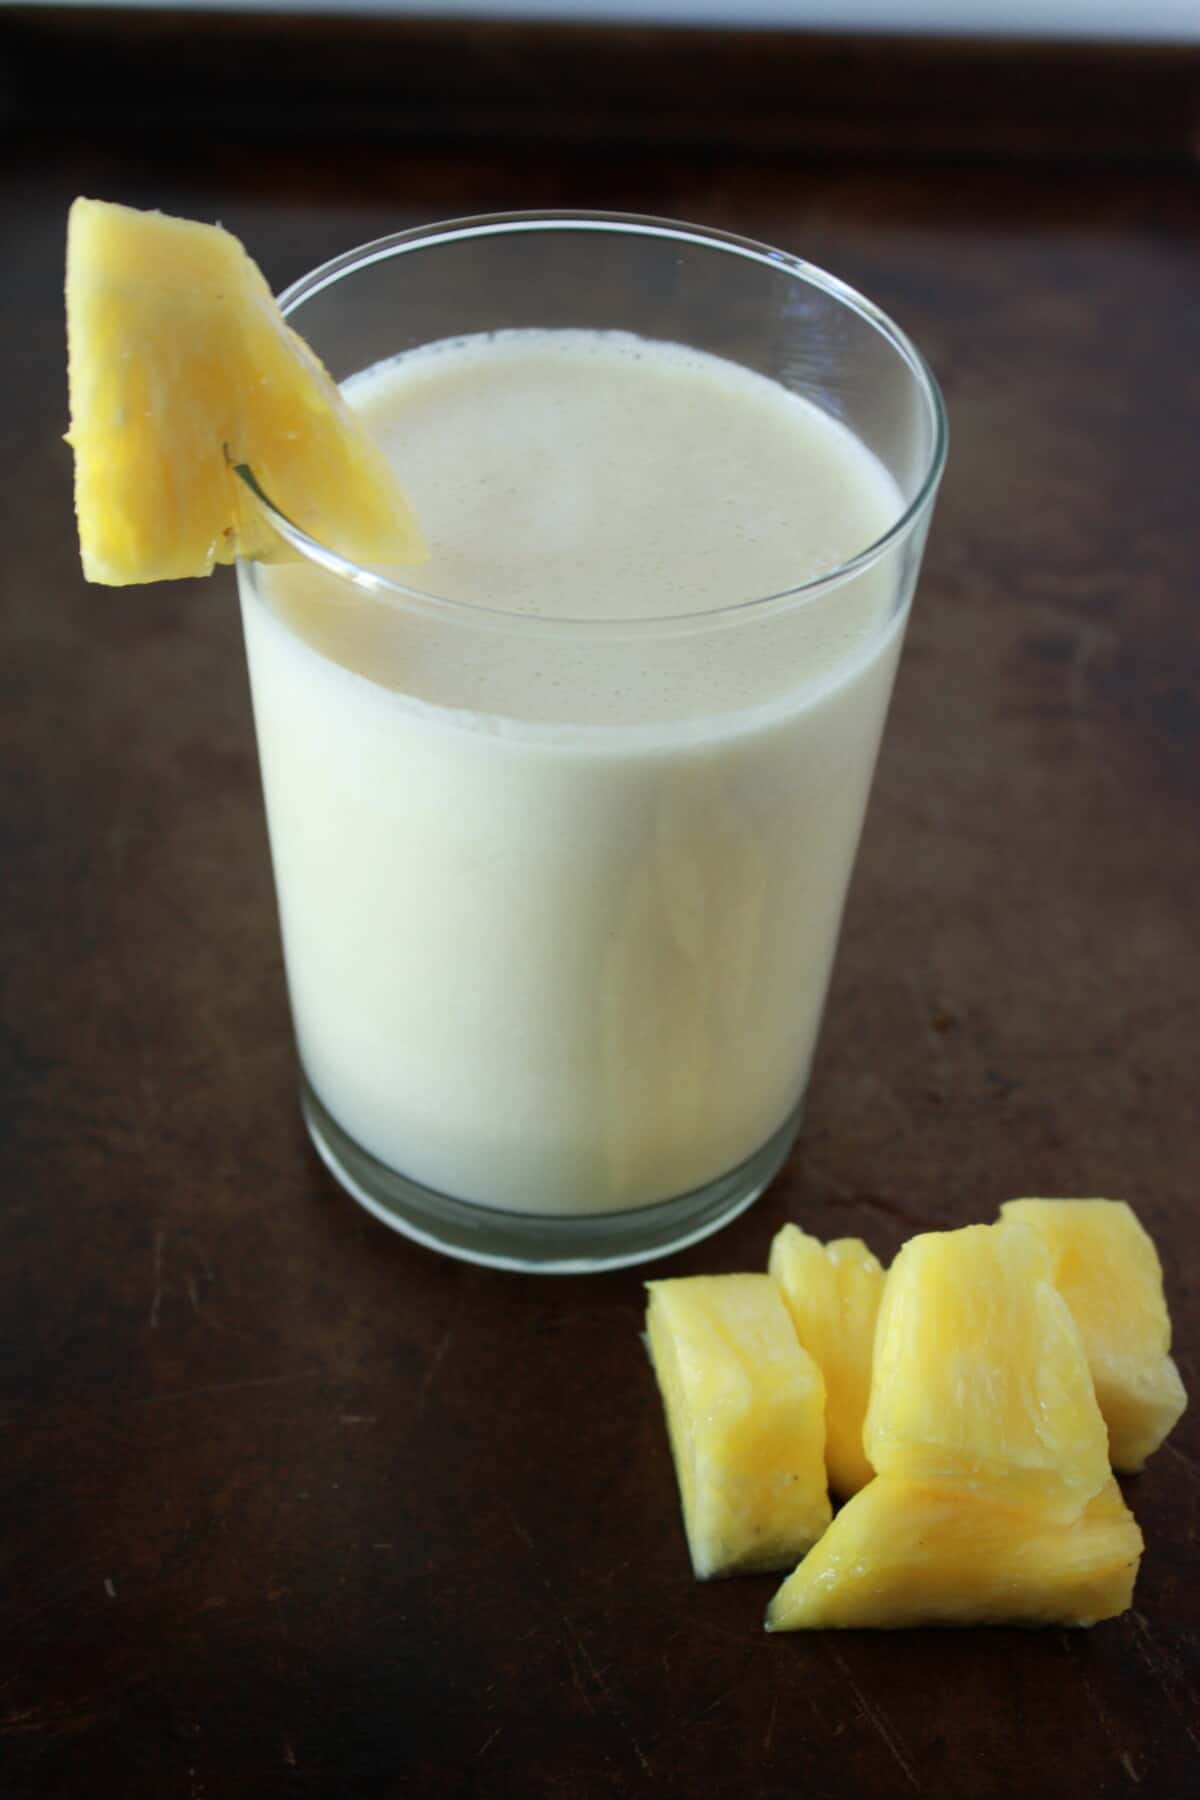 Pineapple Banana Protein Smoothie in a glass